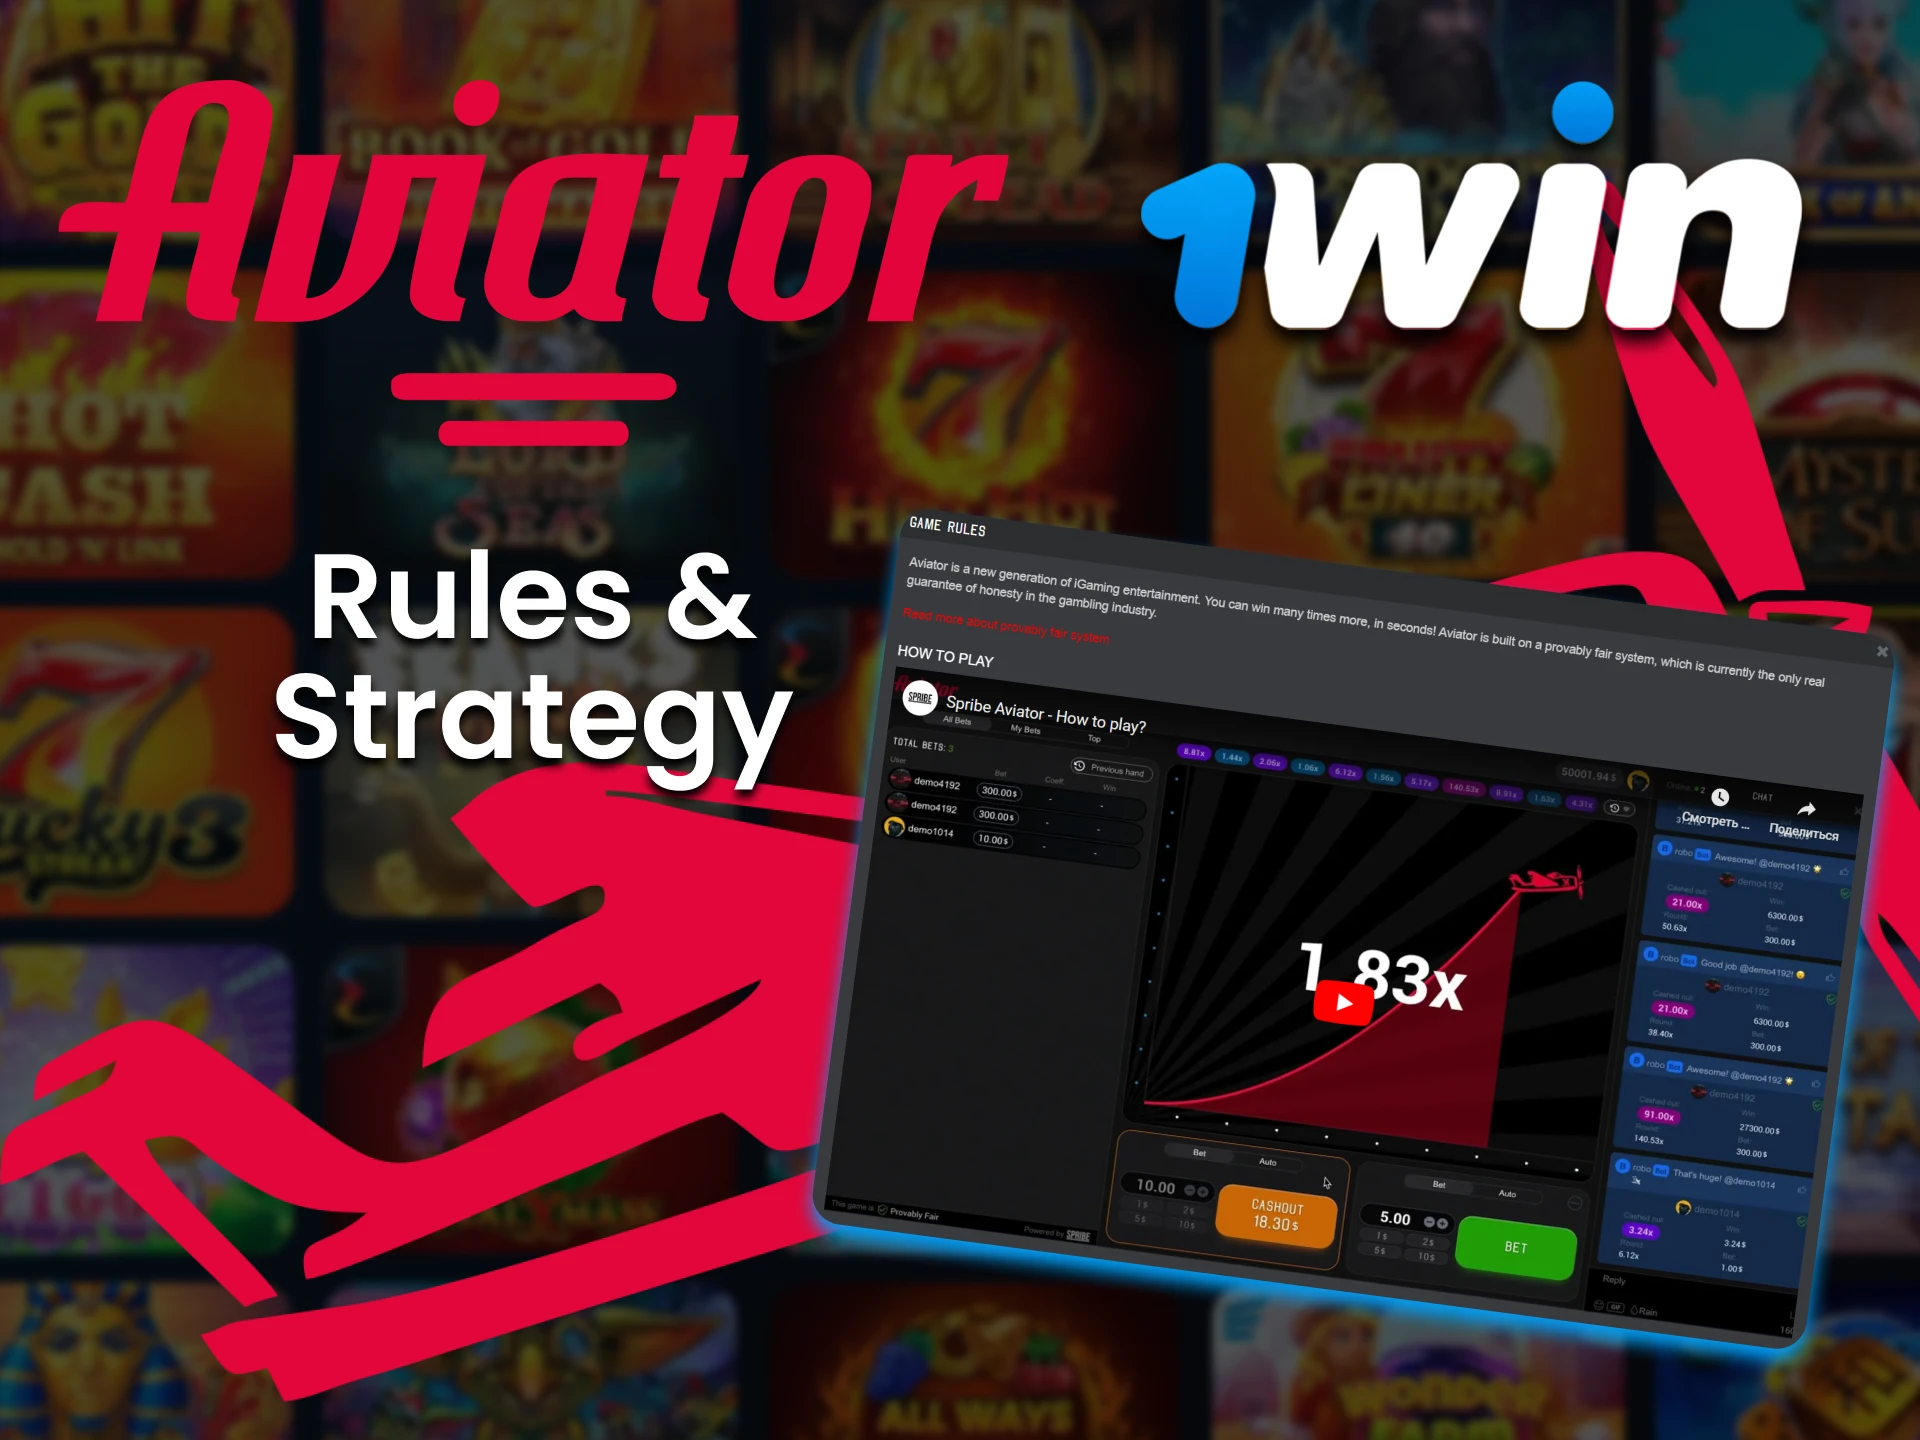 Learn the rules of the Aviator game on 1win.